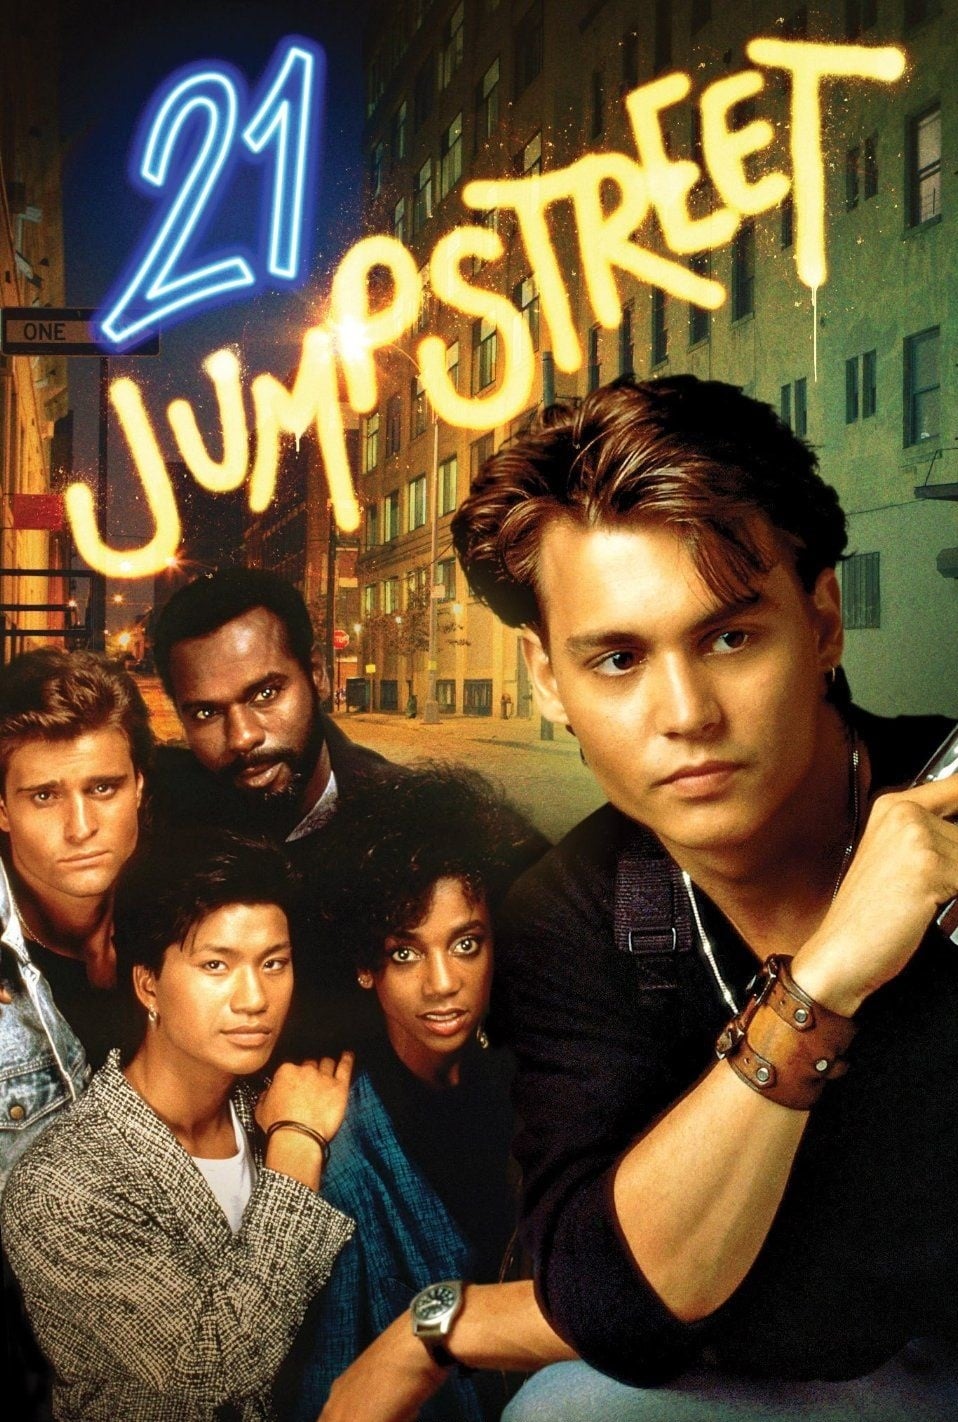 21 Jump Street TV Shows About Undercover Agent